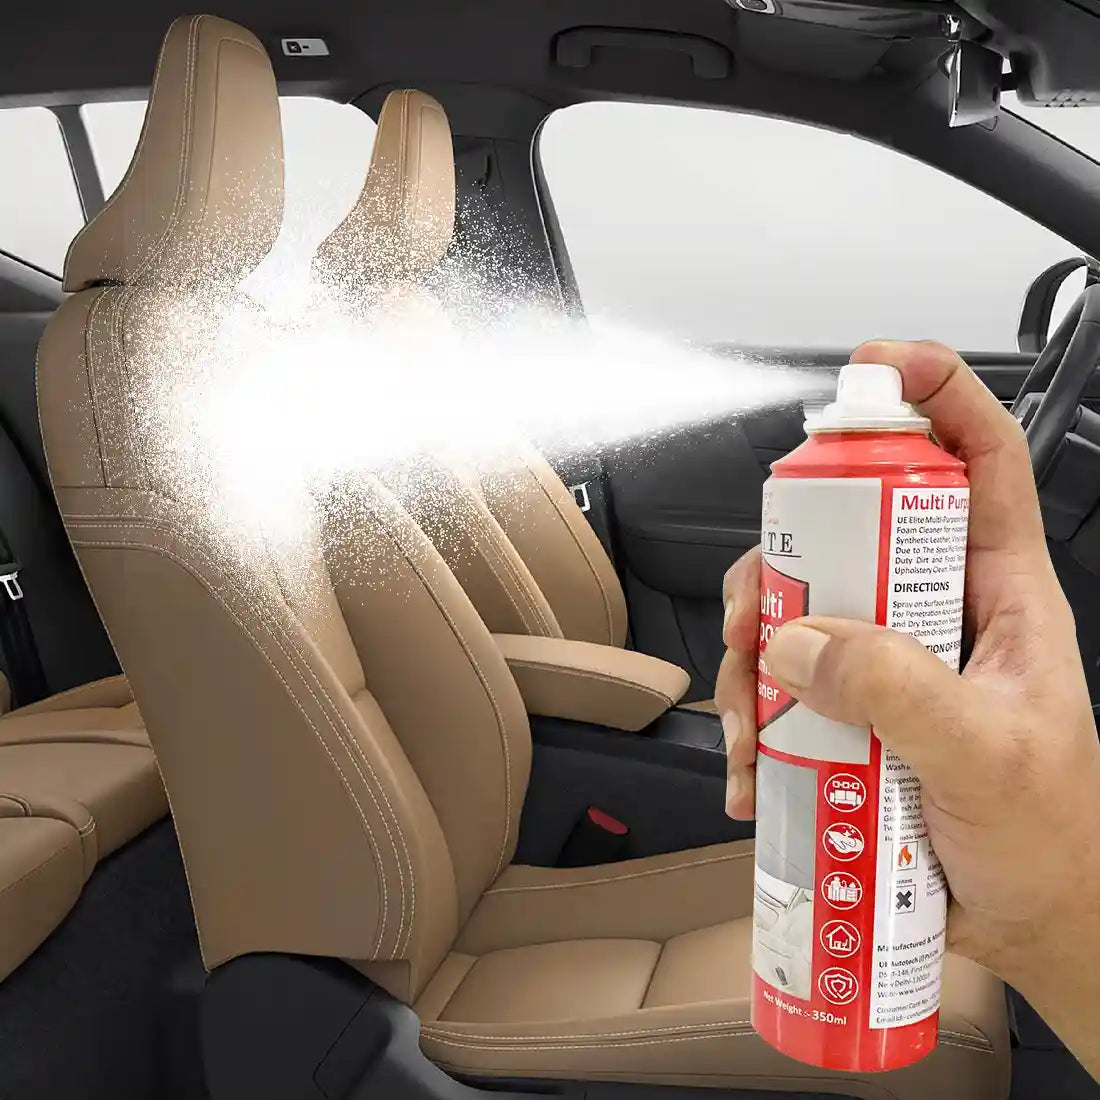 Car Seat Cleaner Vehicle Magic Foam Cleaner Spray Powerful Stain